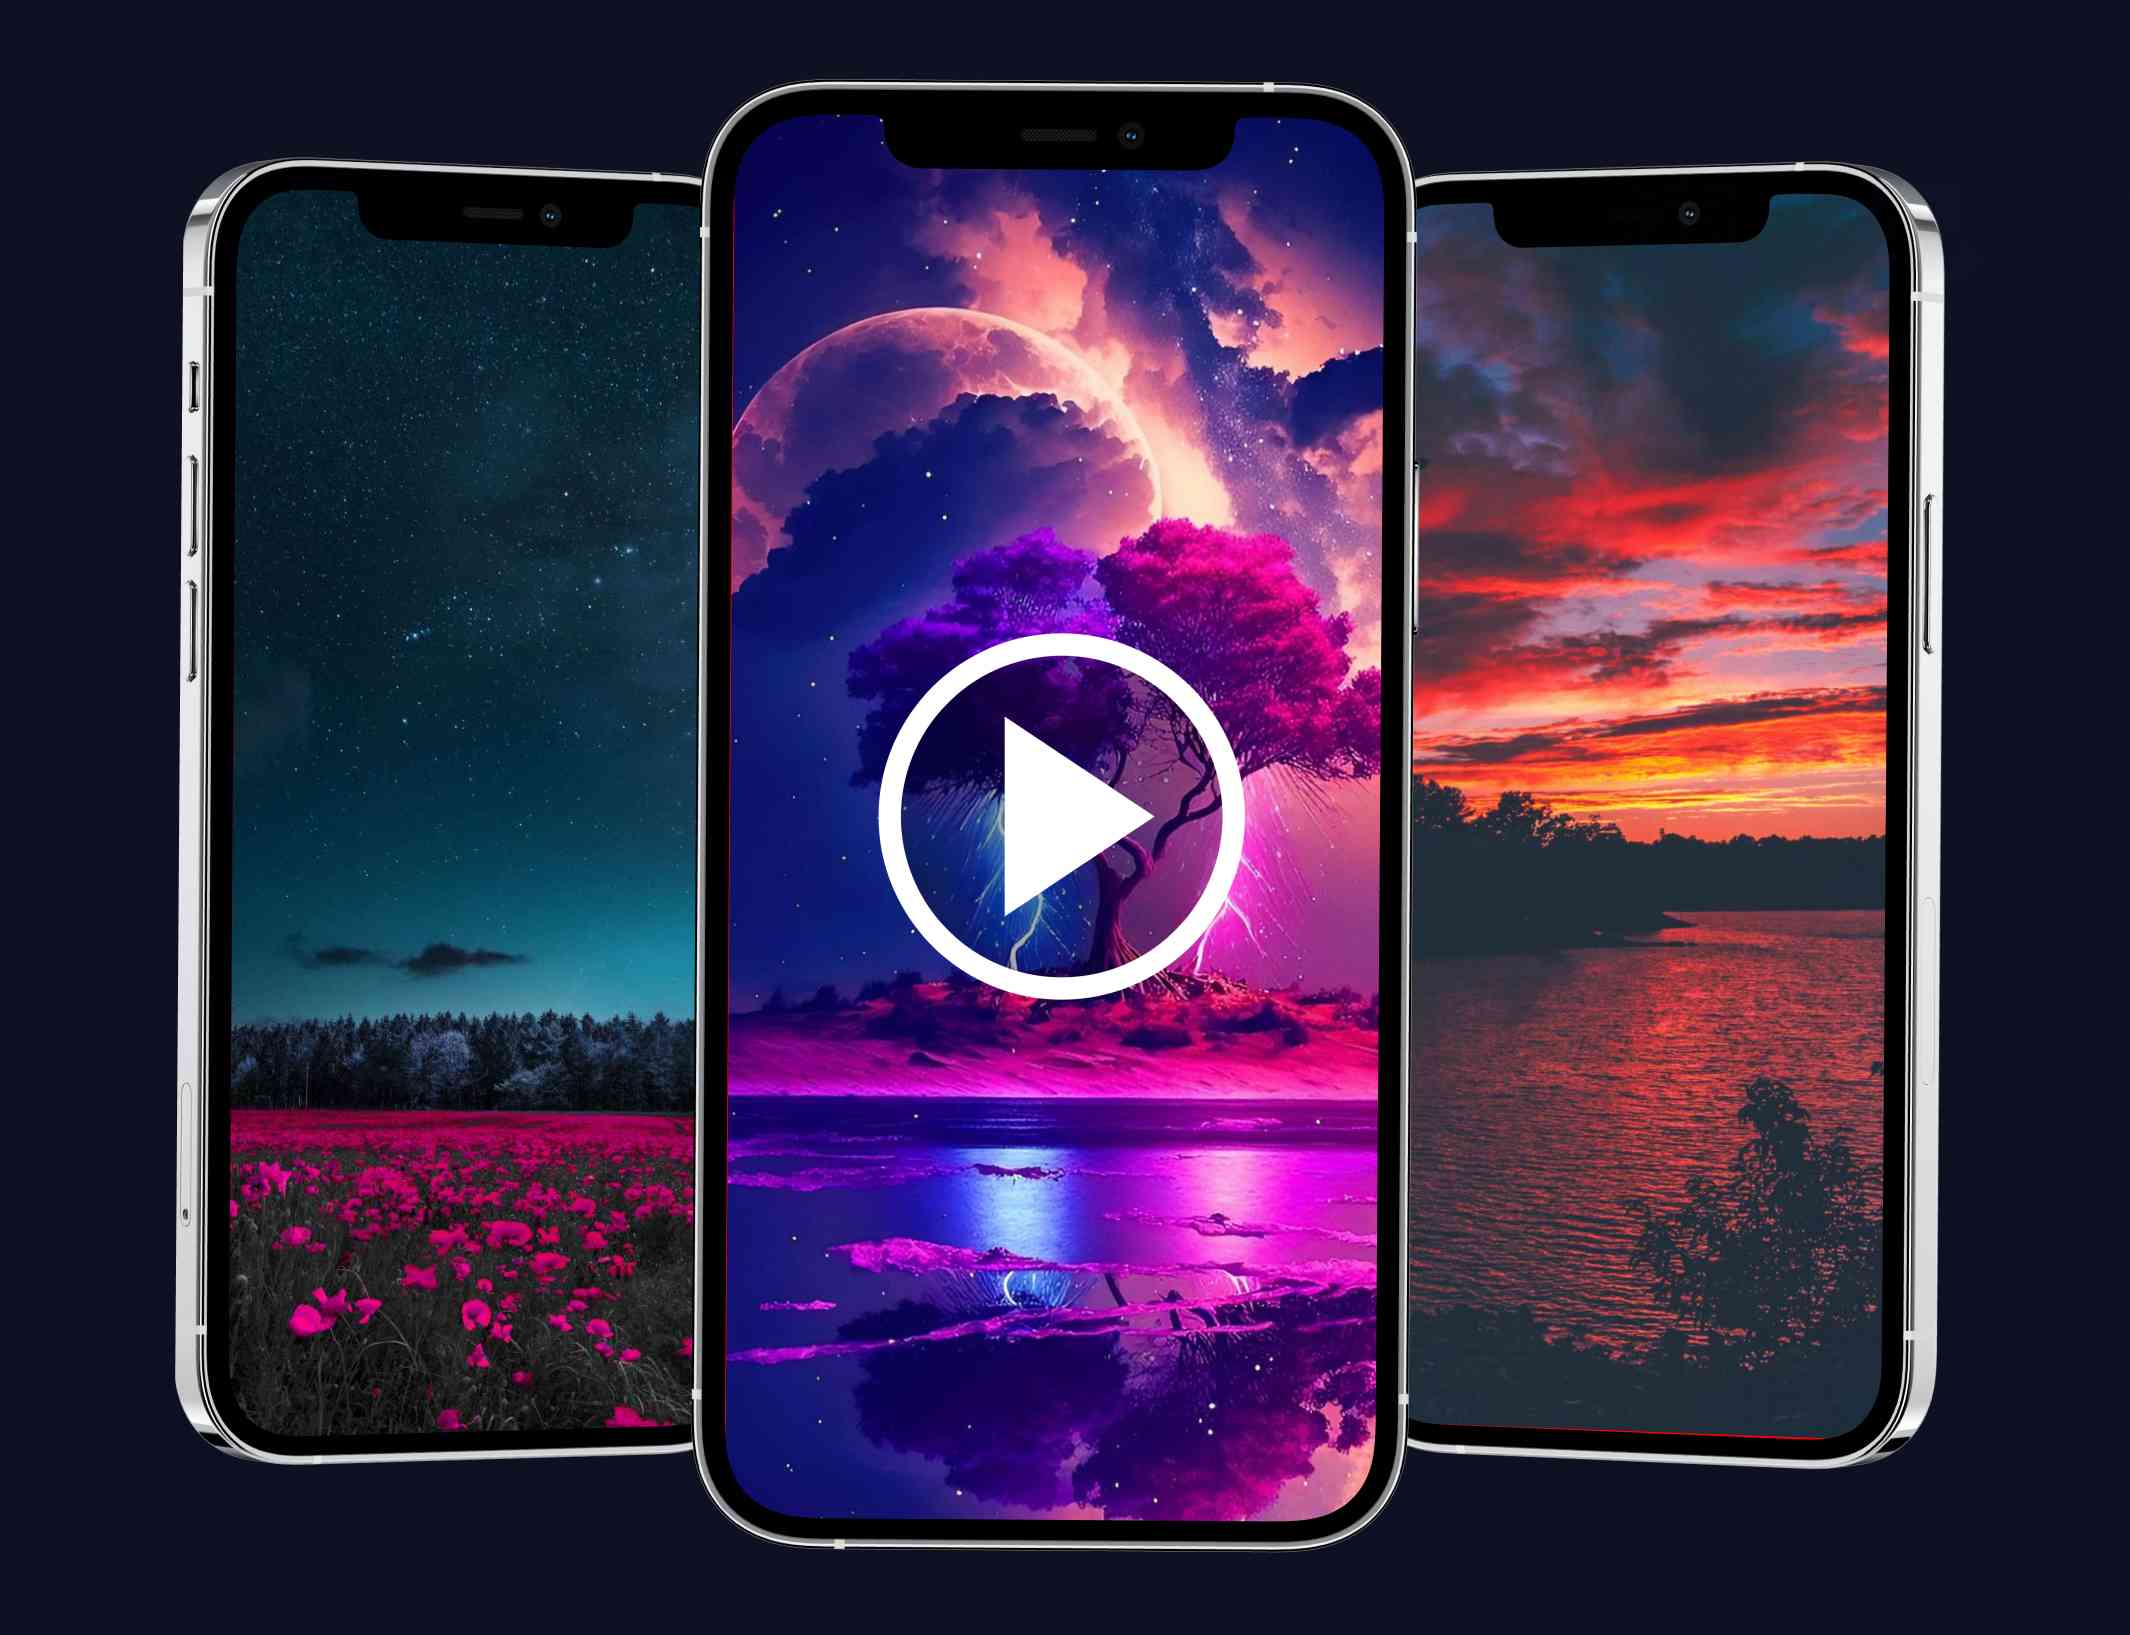 Nature Live Wallpapers